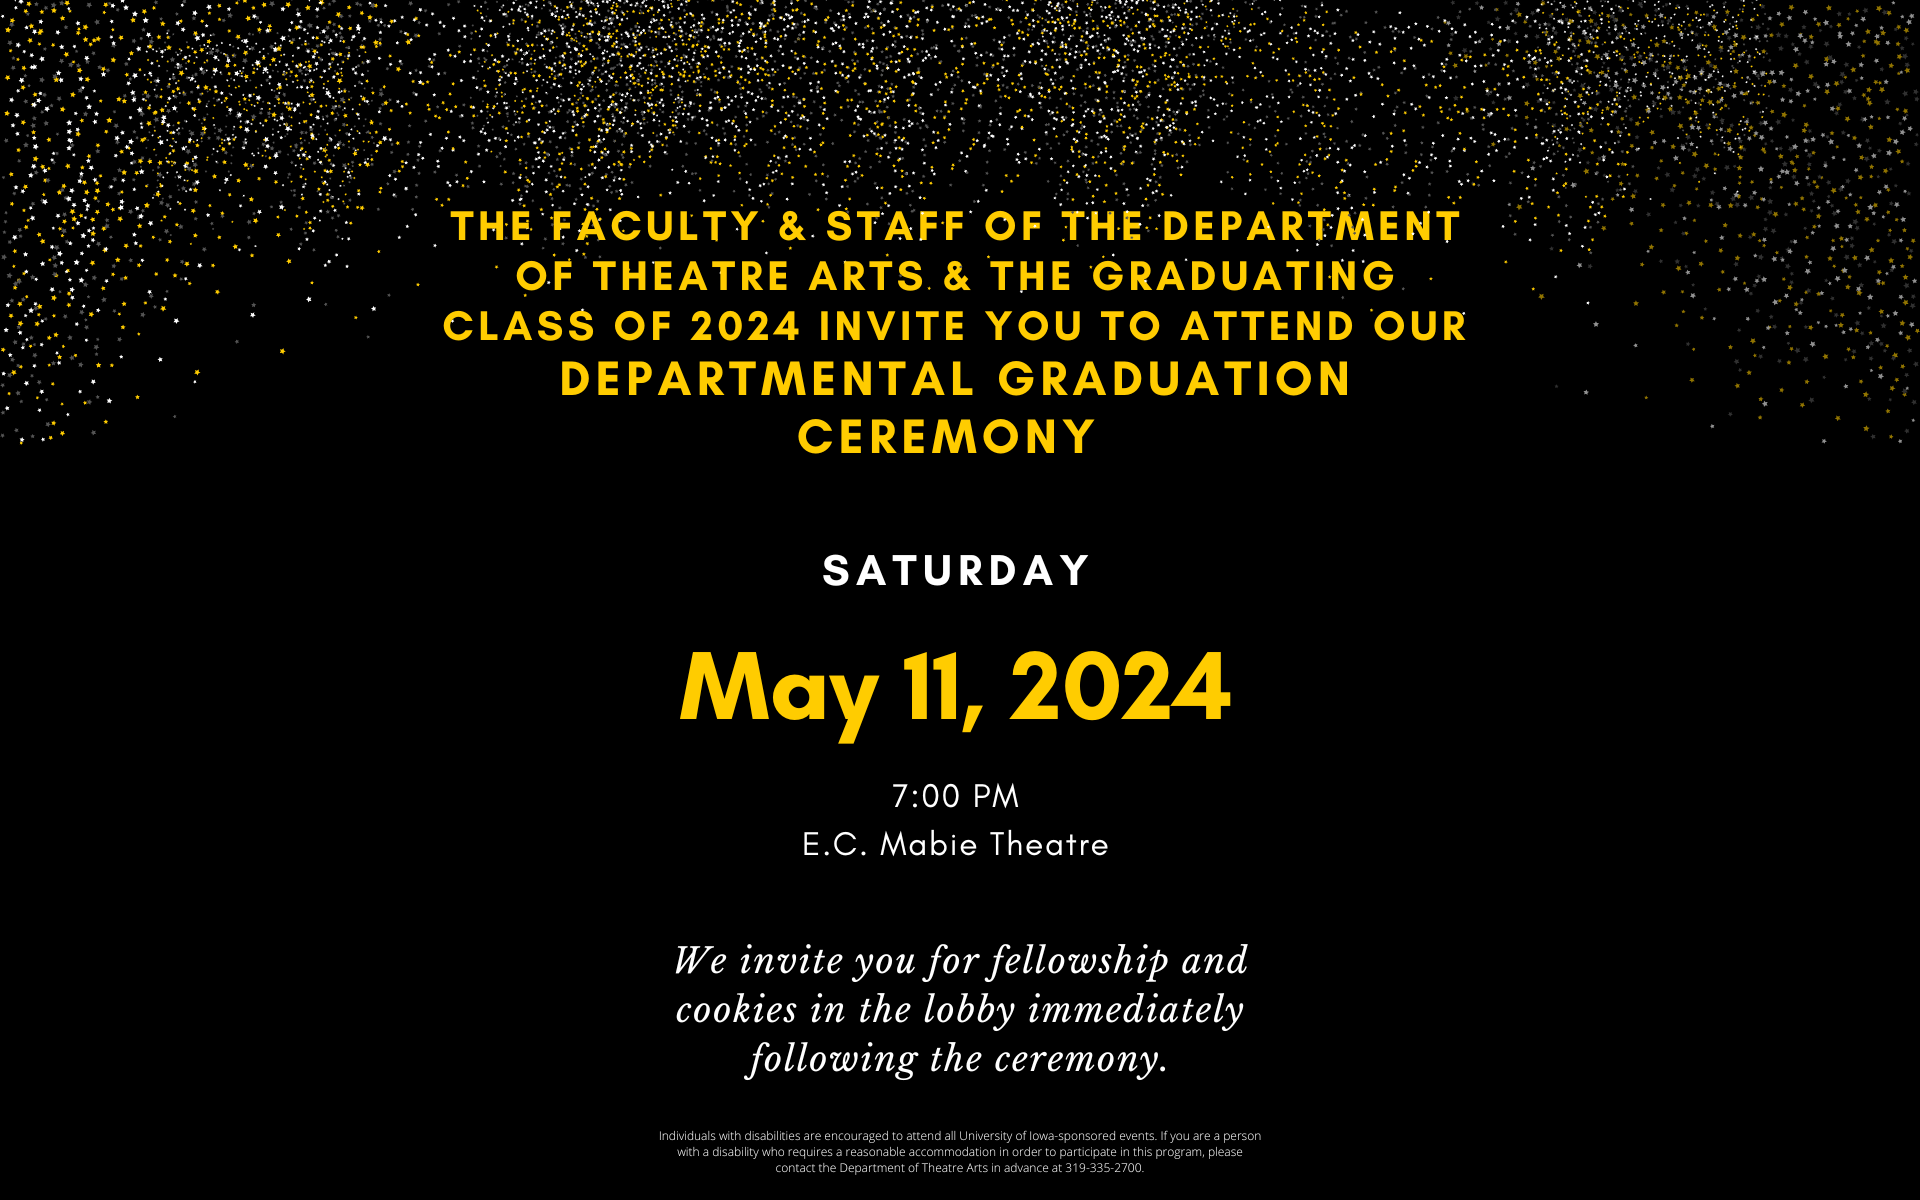 The faculty & staff of the department of theatre arts & the graduating class of 2024 invite you to attend our departmental graduation ceremony Saturday May 11 2024 7:00opm EC Mabie Theatre. We invite you for fellowship and cookies in the lobby immediately following the ceremony